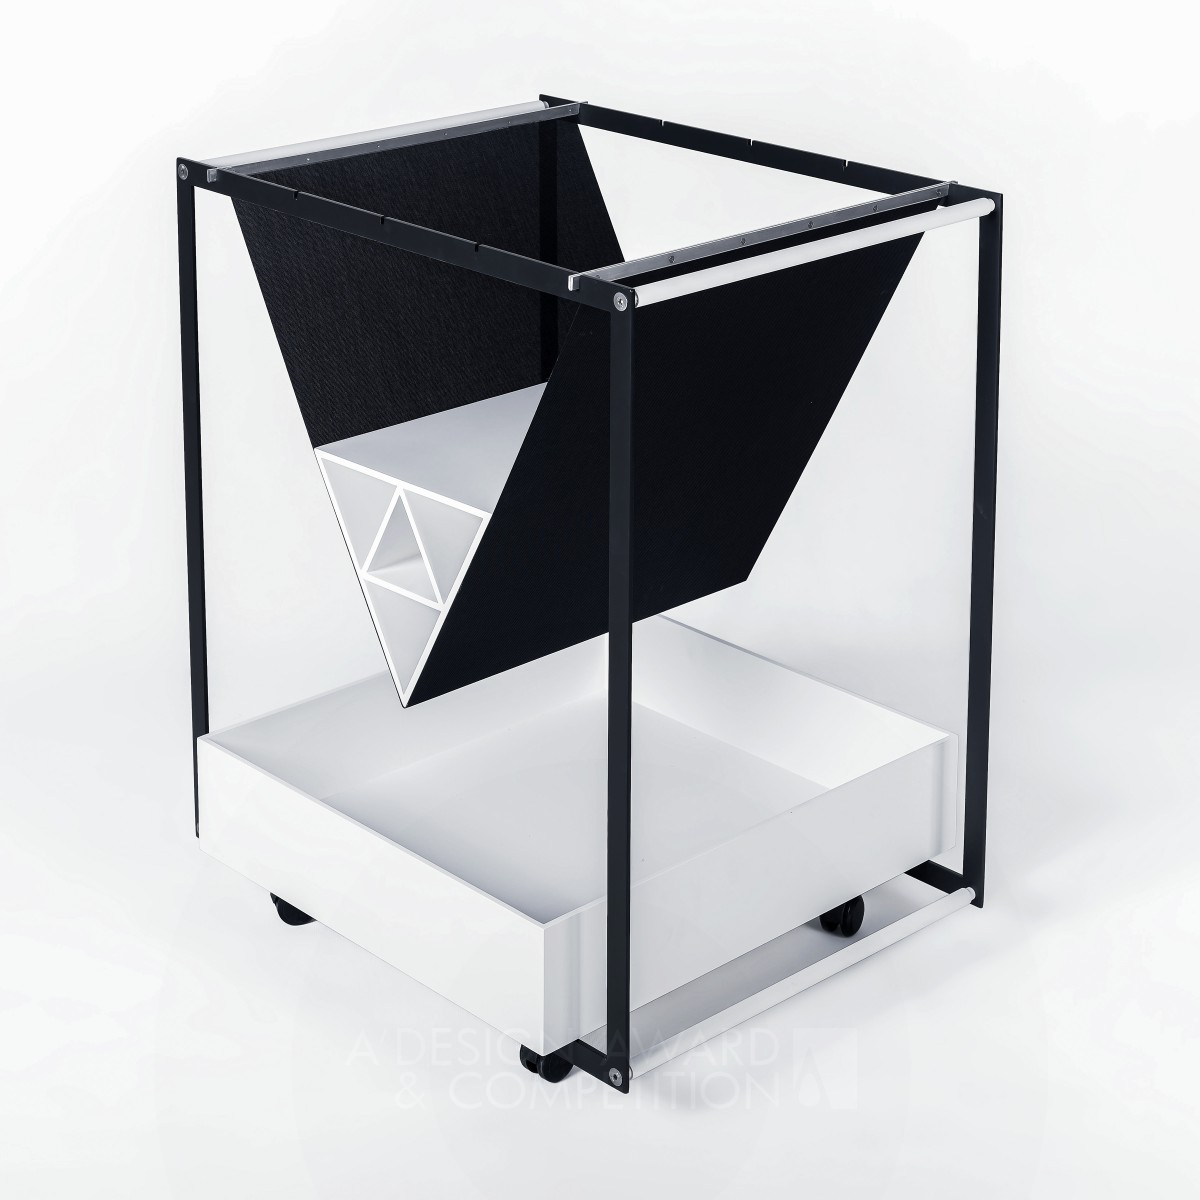 Amir Ghasempour wins Iron at the prestigious A' Furniture Design Award with Aviz Multifunctional Trolley.